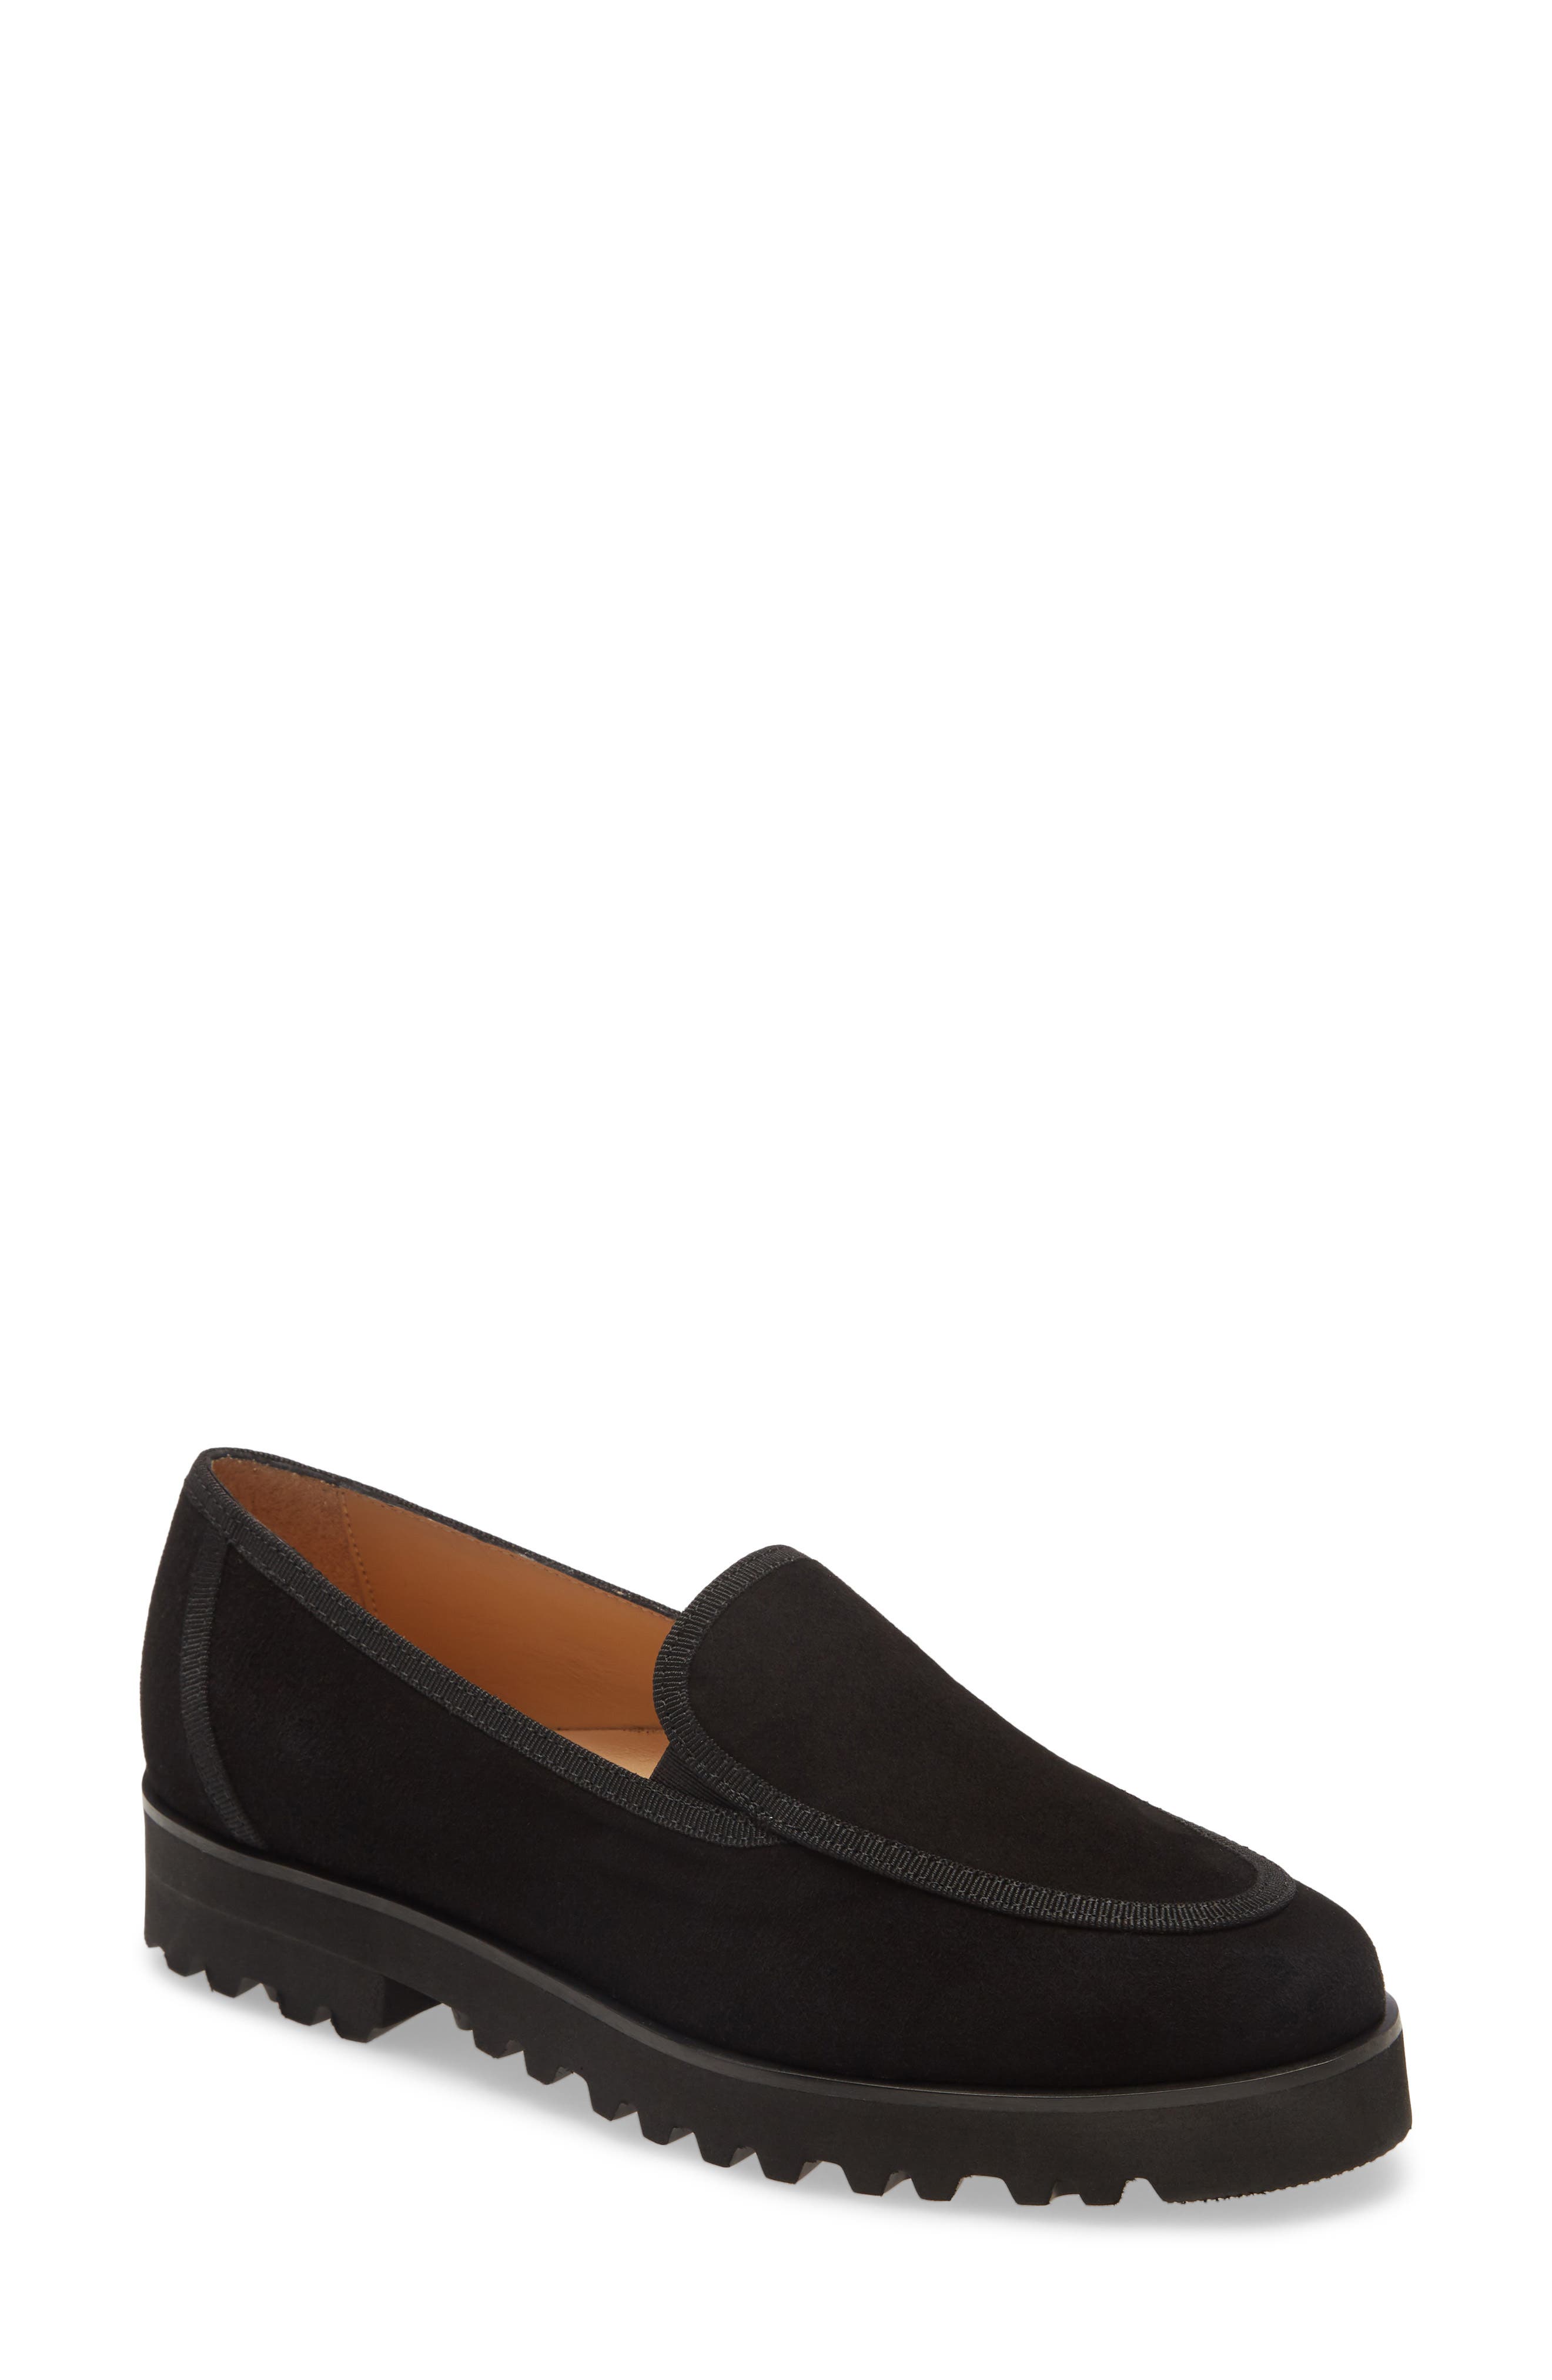 ron white loafers